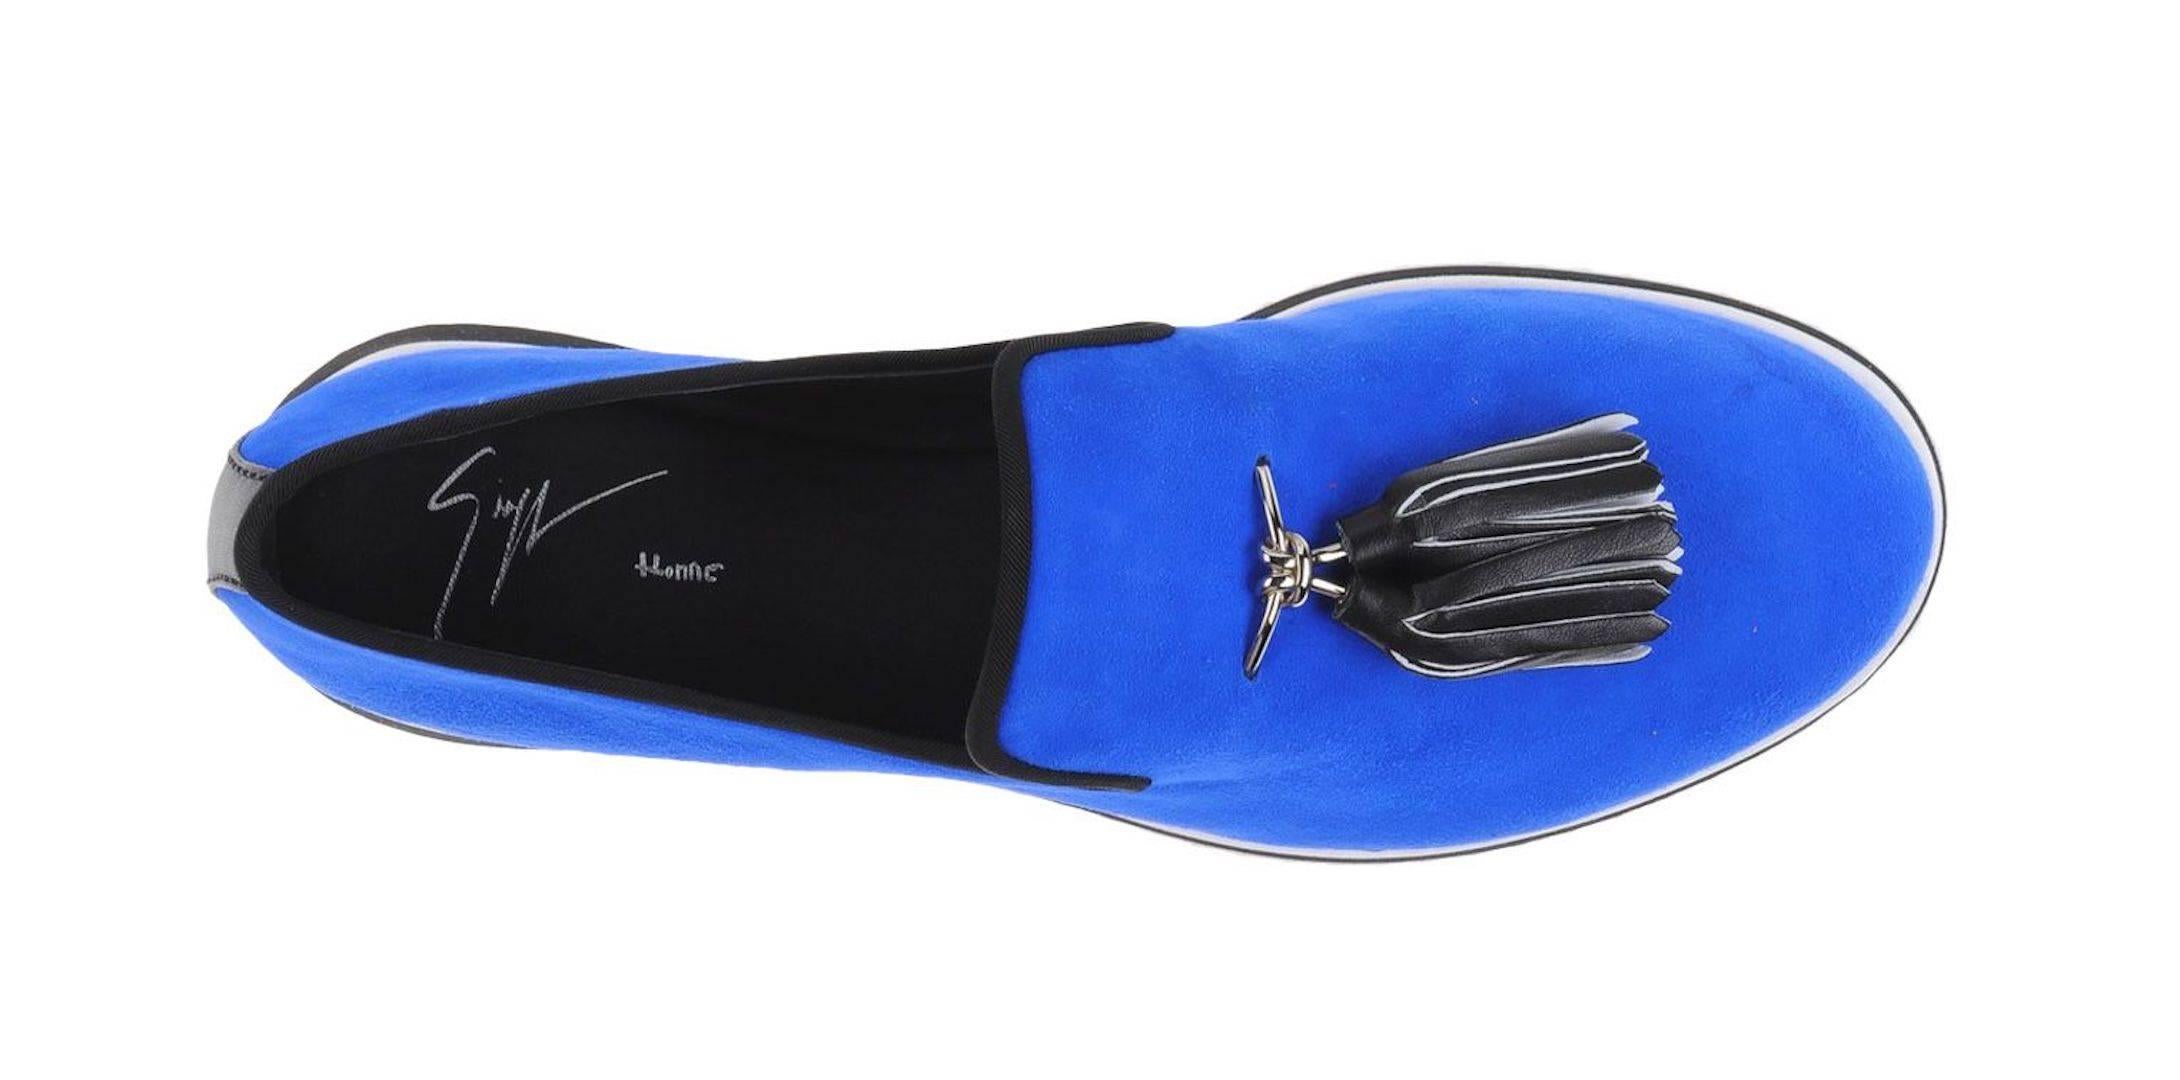 CURATOR'S NOTES

Giuseppe Zanotti Men's New Blue Suede Loafers Smoking Slippers in Box 

Size IT 41 (US 8)
Suede 
Leather
Slide on
Rubber sole
Made in Italy
Heel height ~0.75"
Includes original Giuseppe Zanotti box